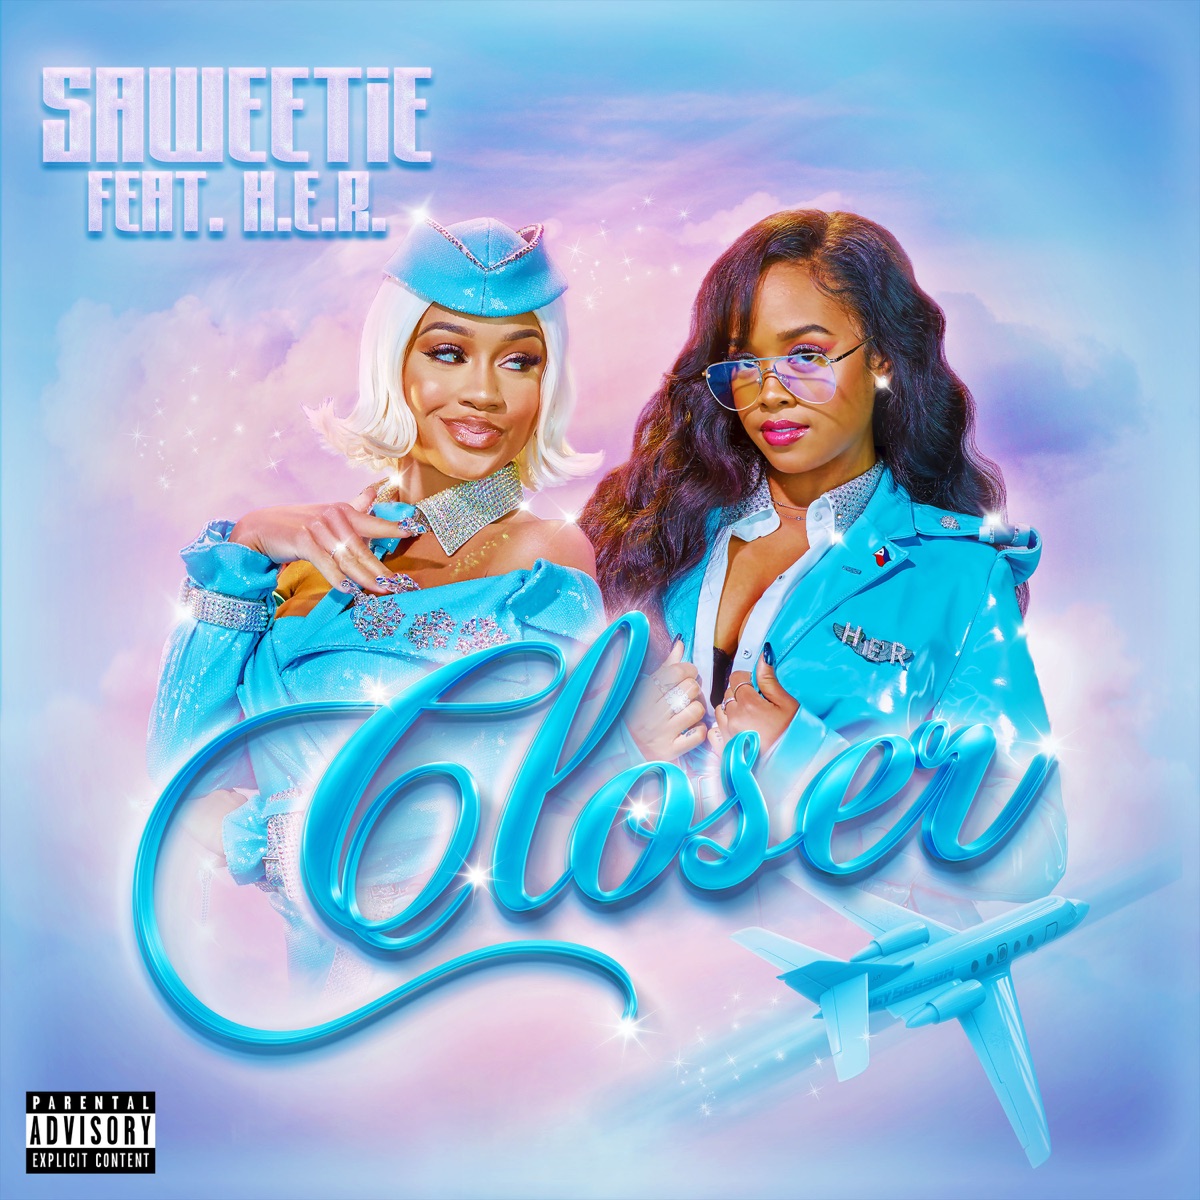 Cover art for『Saweetie - Closer (feat. H.E.R.)』from the release『Closer (feat. H.E.R.)